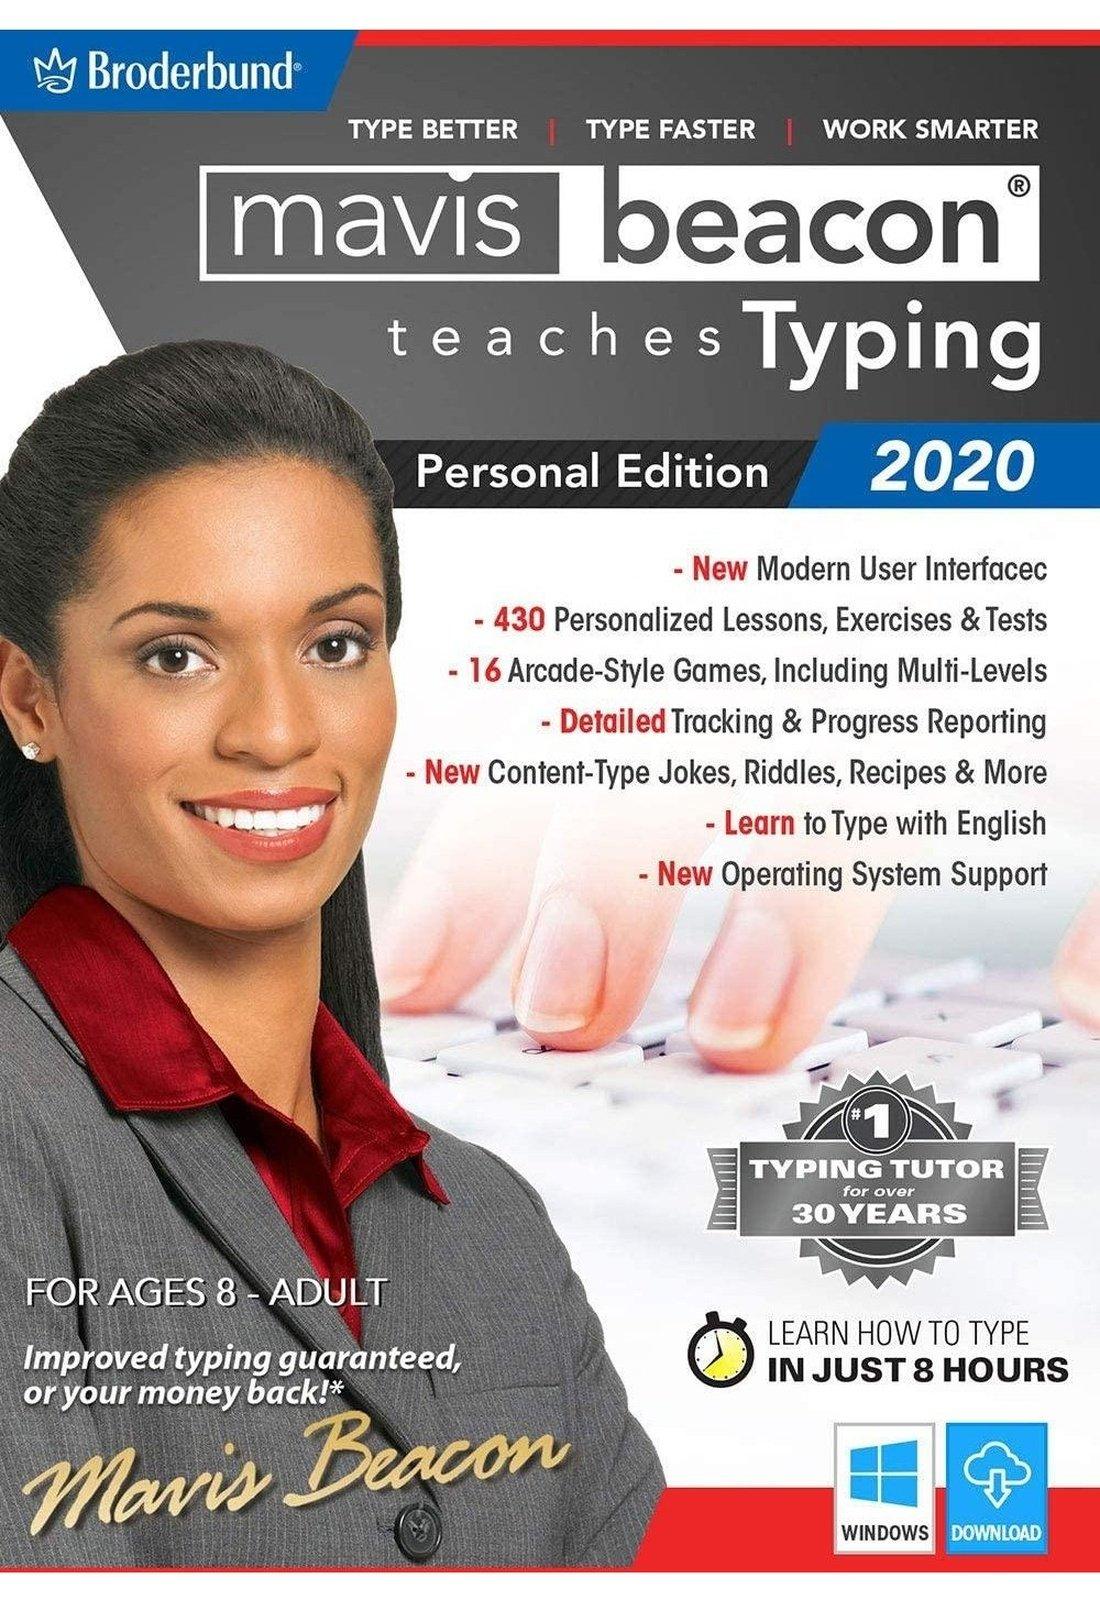 Mavis Beacon Teaches Typing 2020 for Windows - Instant Download for Windows (1 Computer) - SoftwareCW - Authorized Reseller